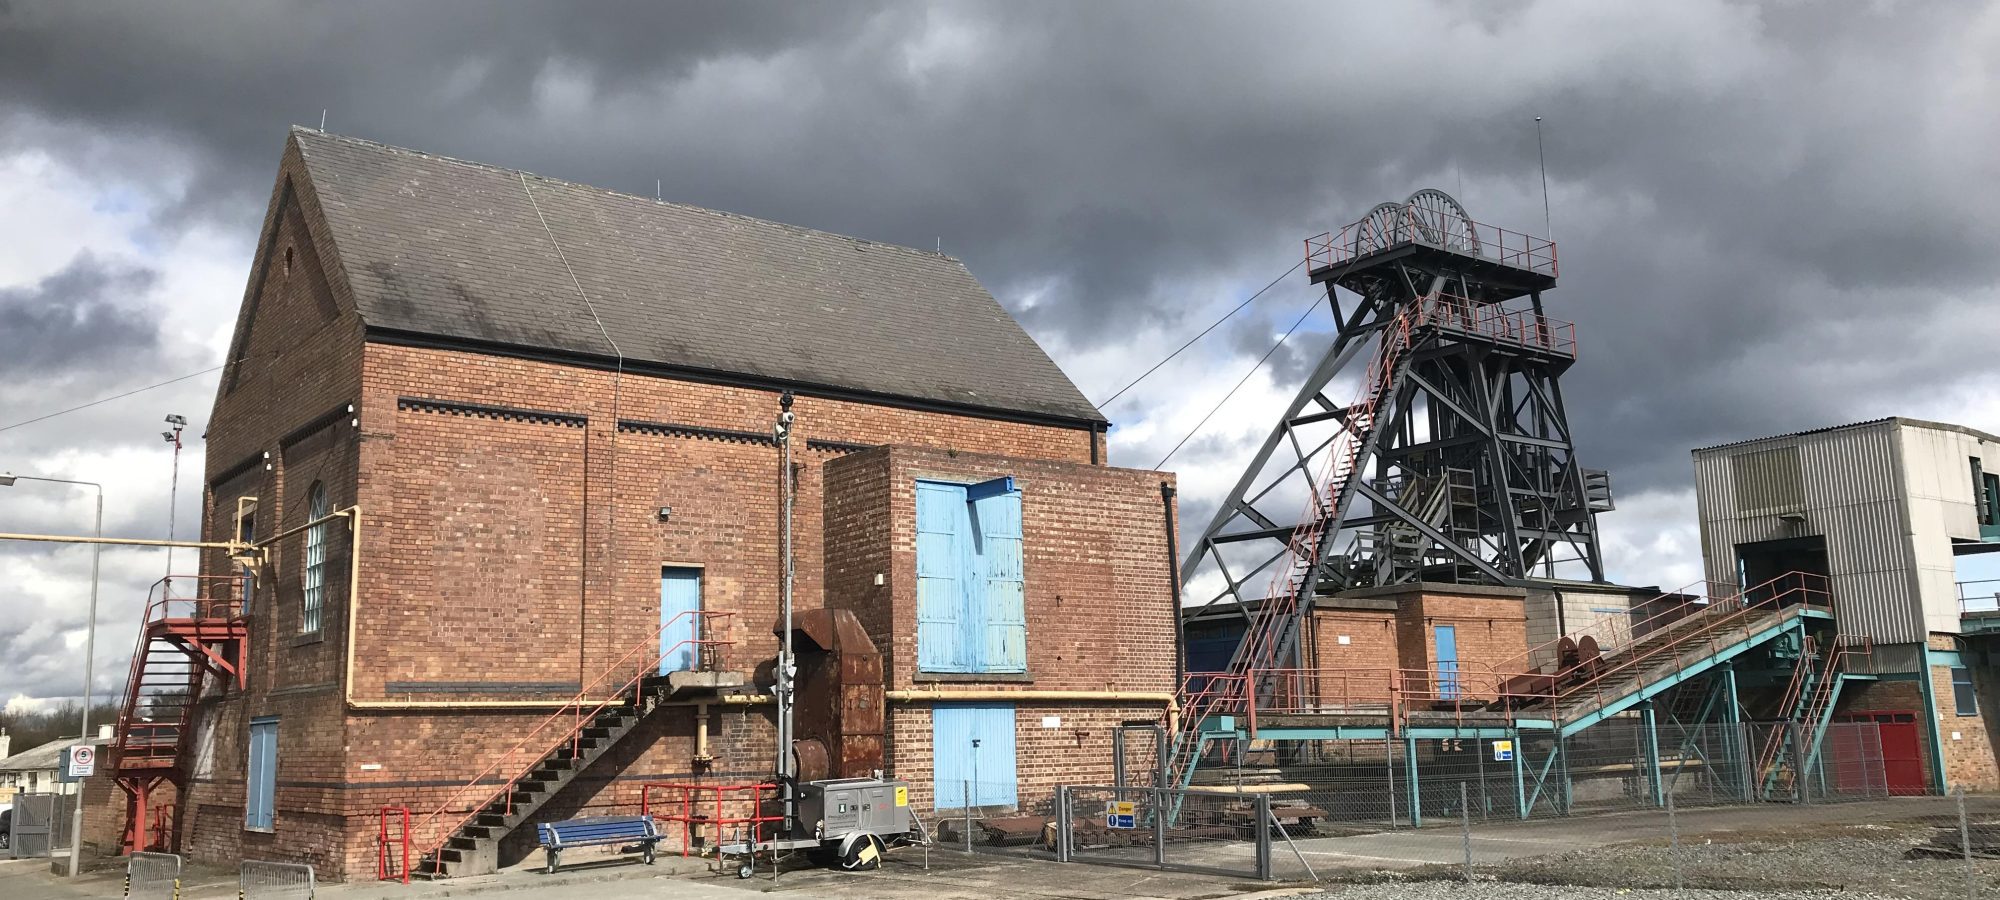 Snibston Colliery